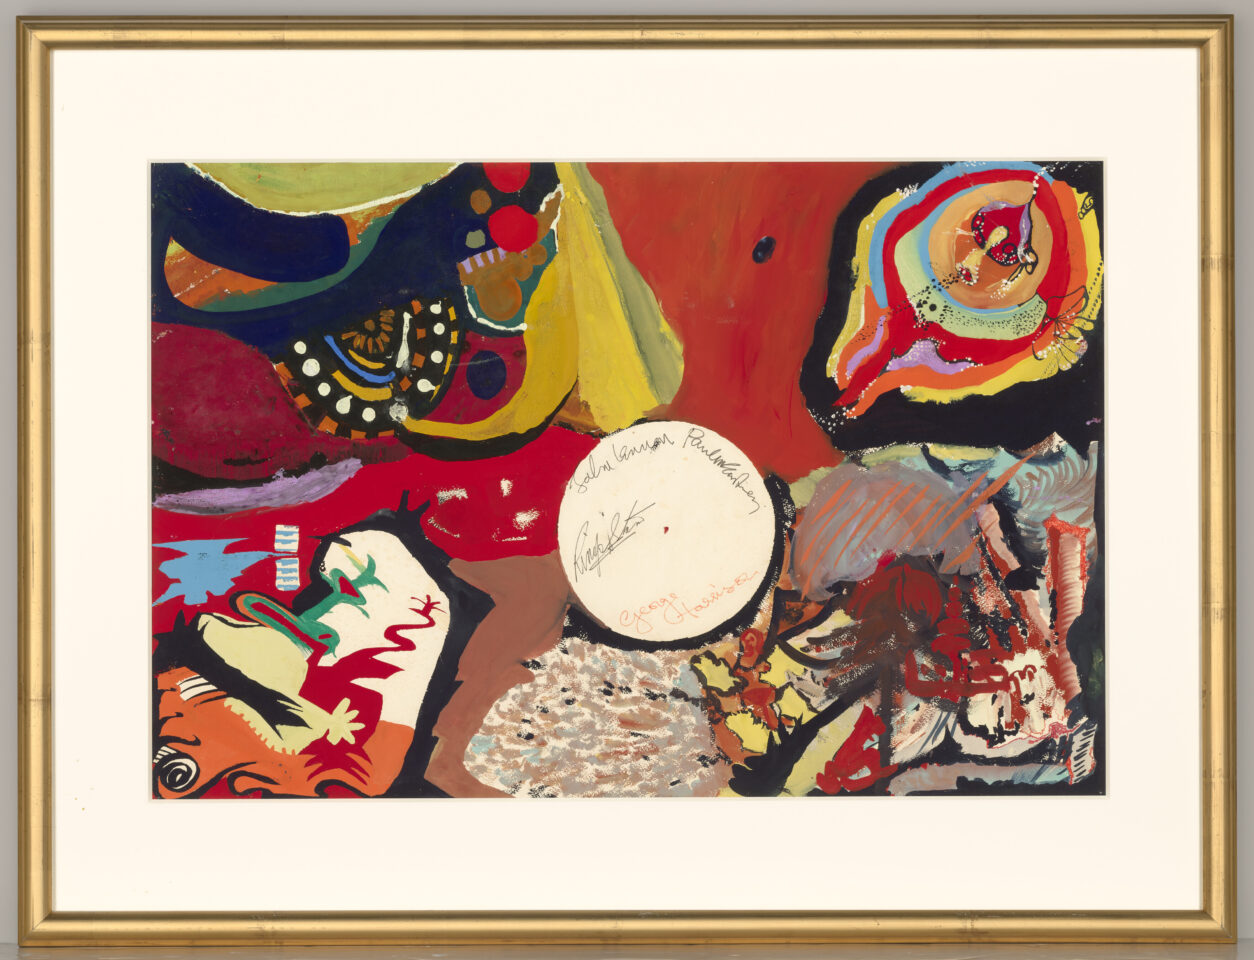 The Beatles’ Psychedelic Painting ‘Images of a Woman’ Auctions for Over $1.7M at Christie’s